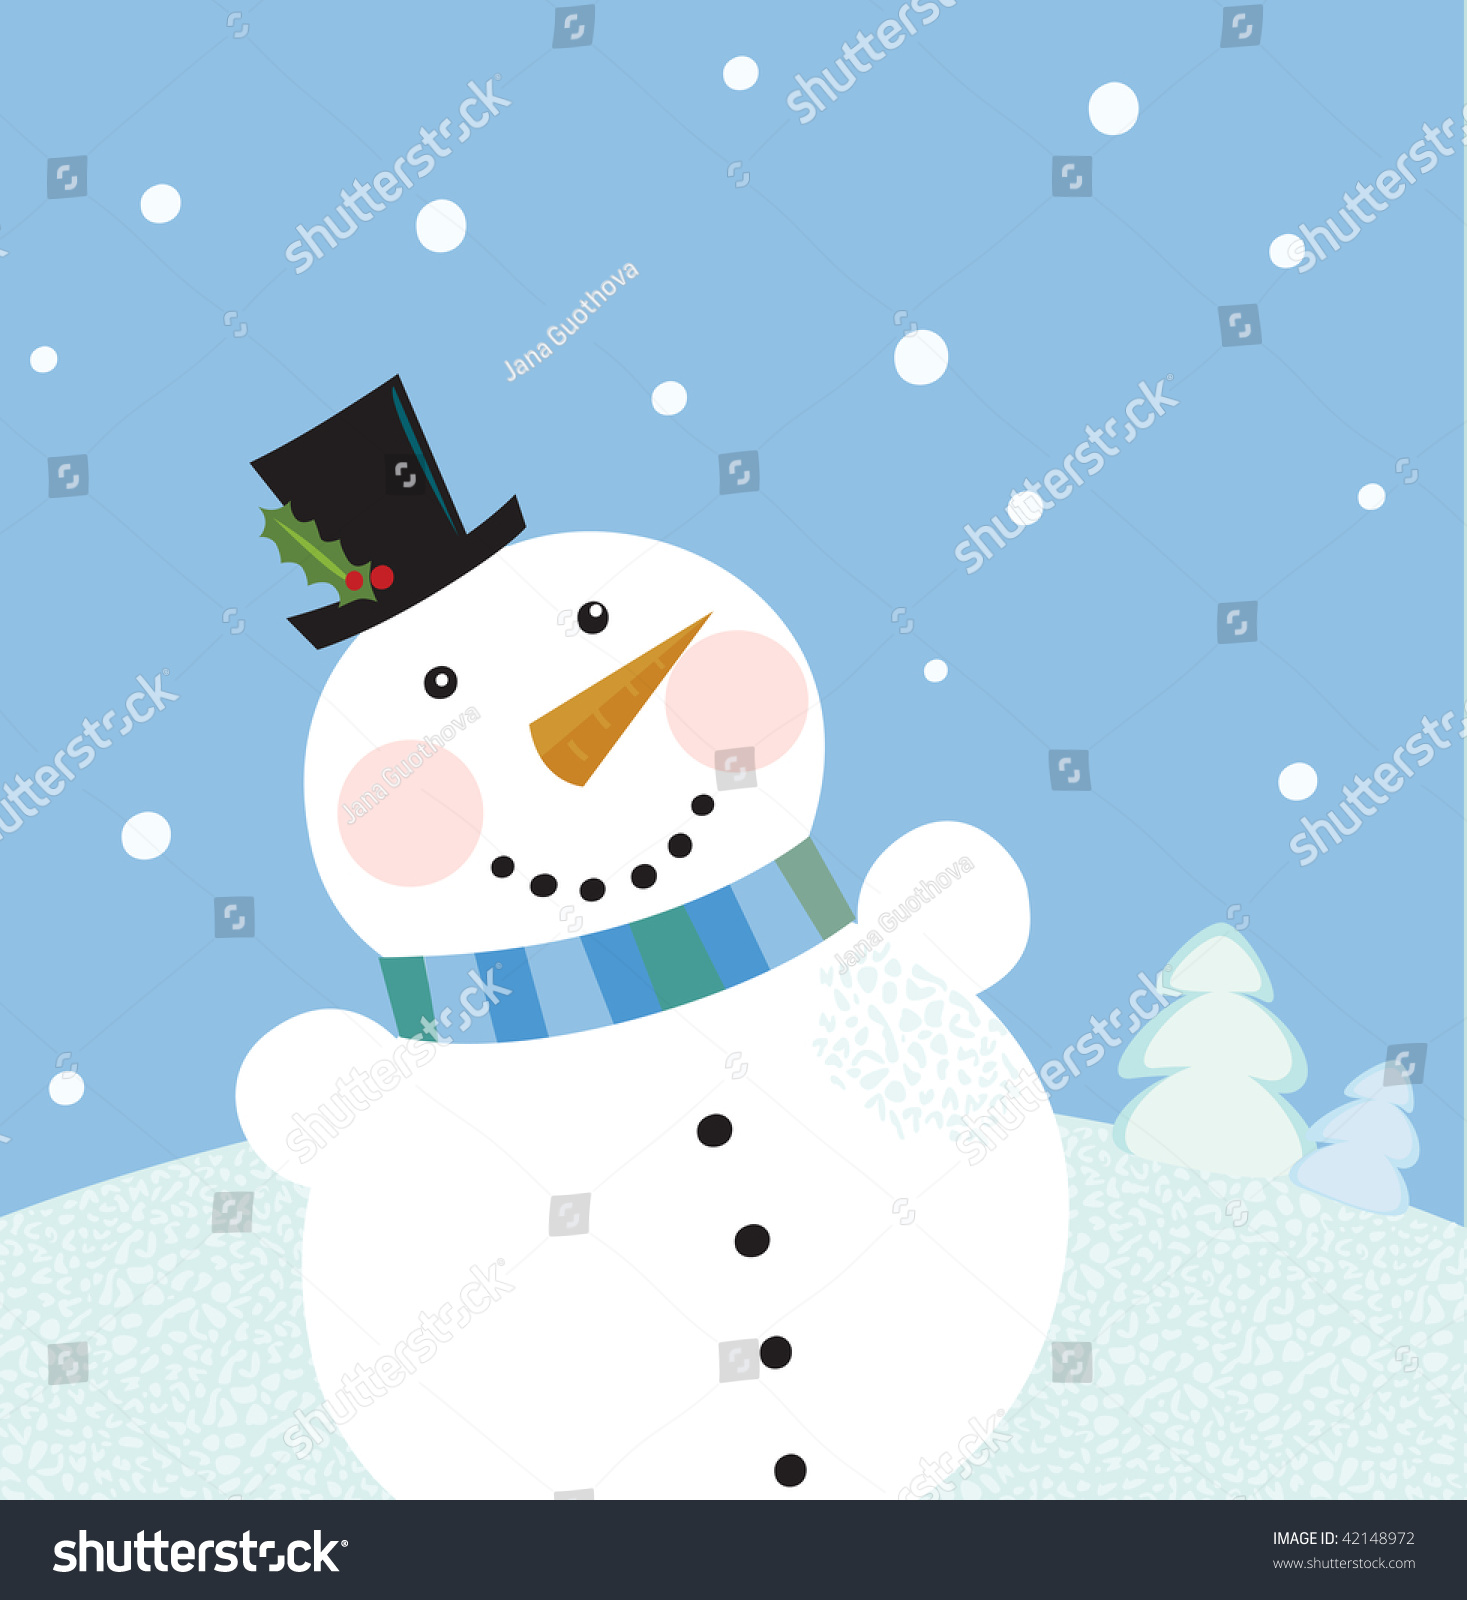 snowy day clipart - photo #37